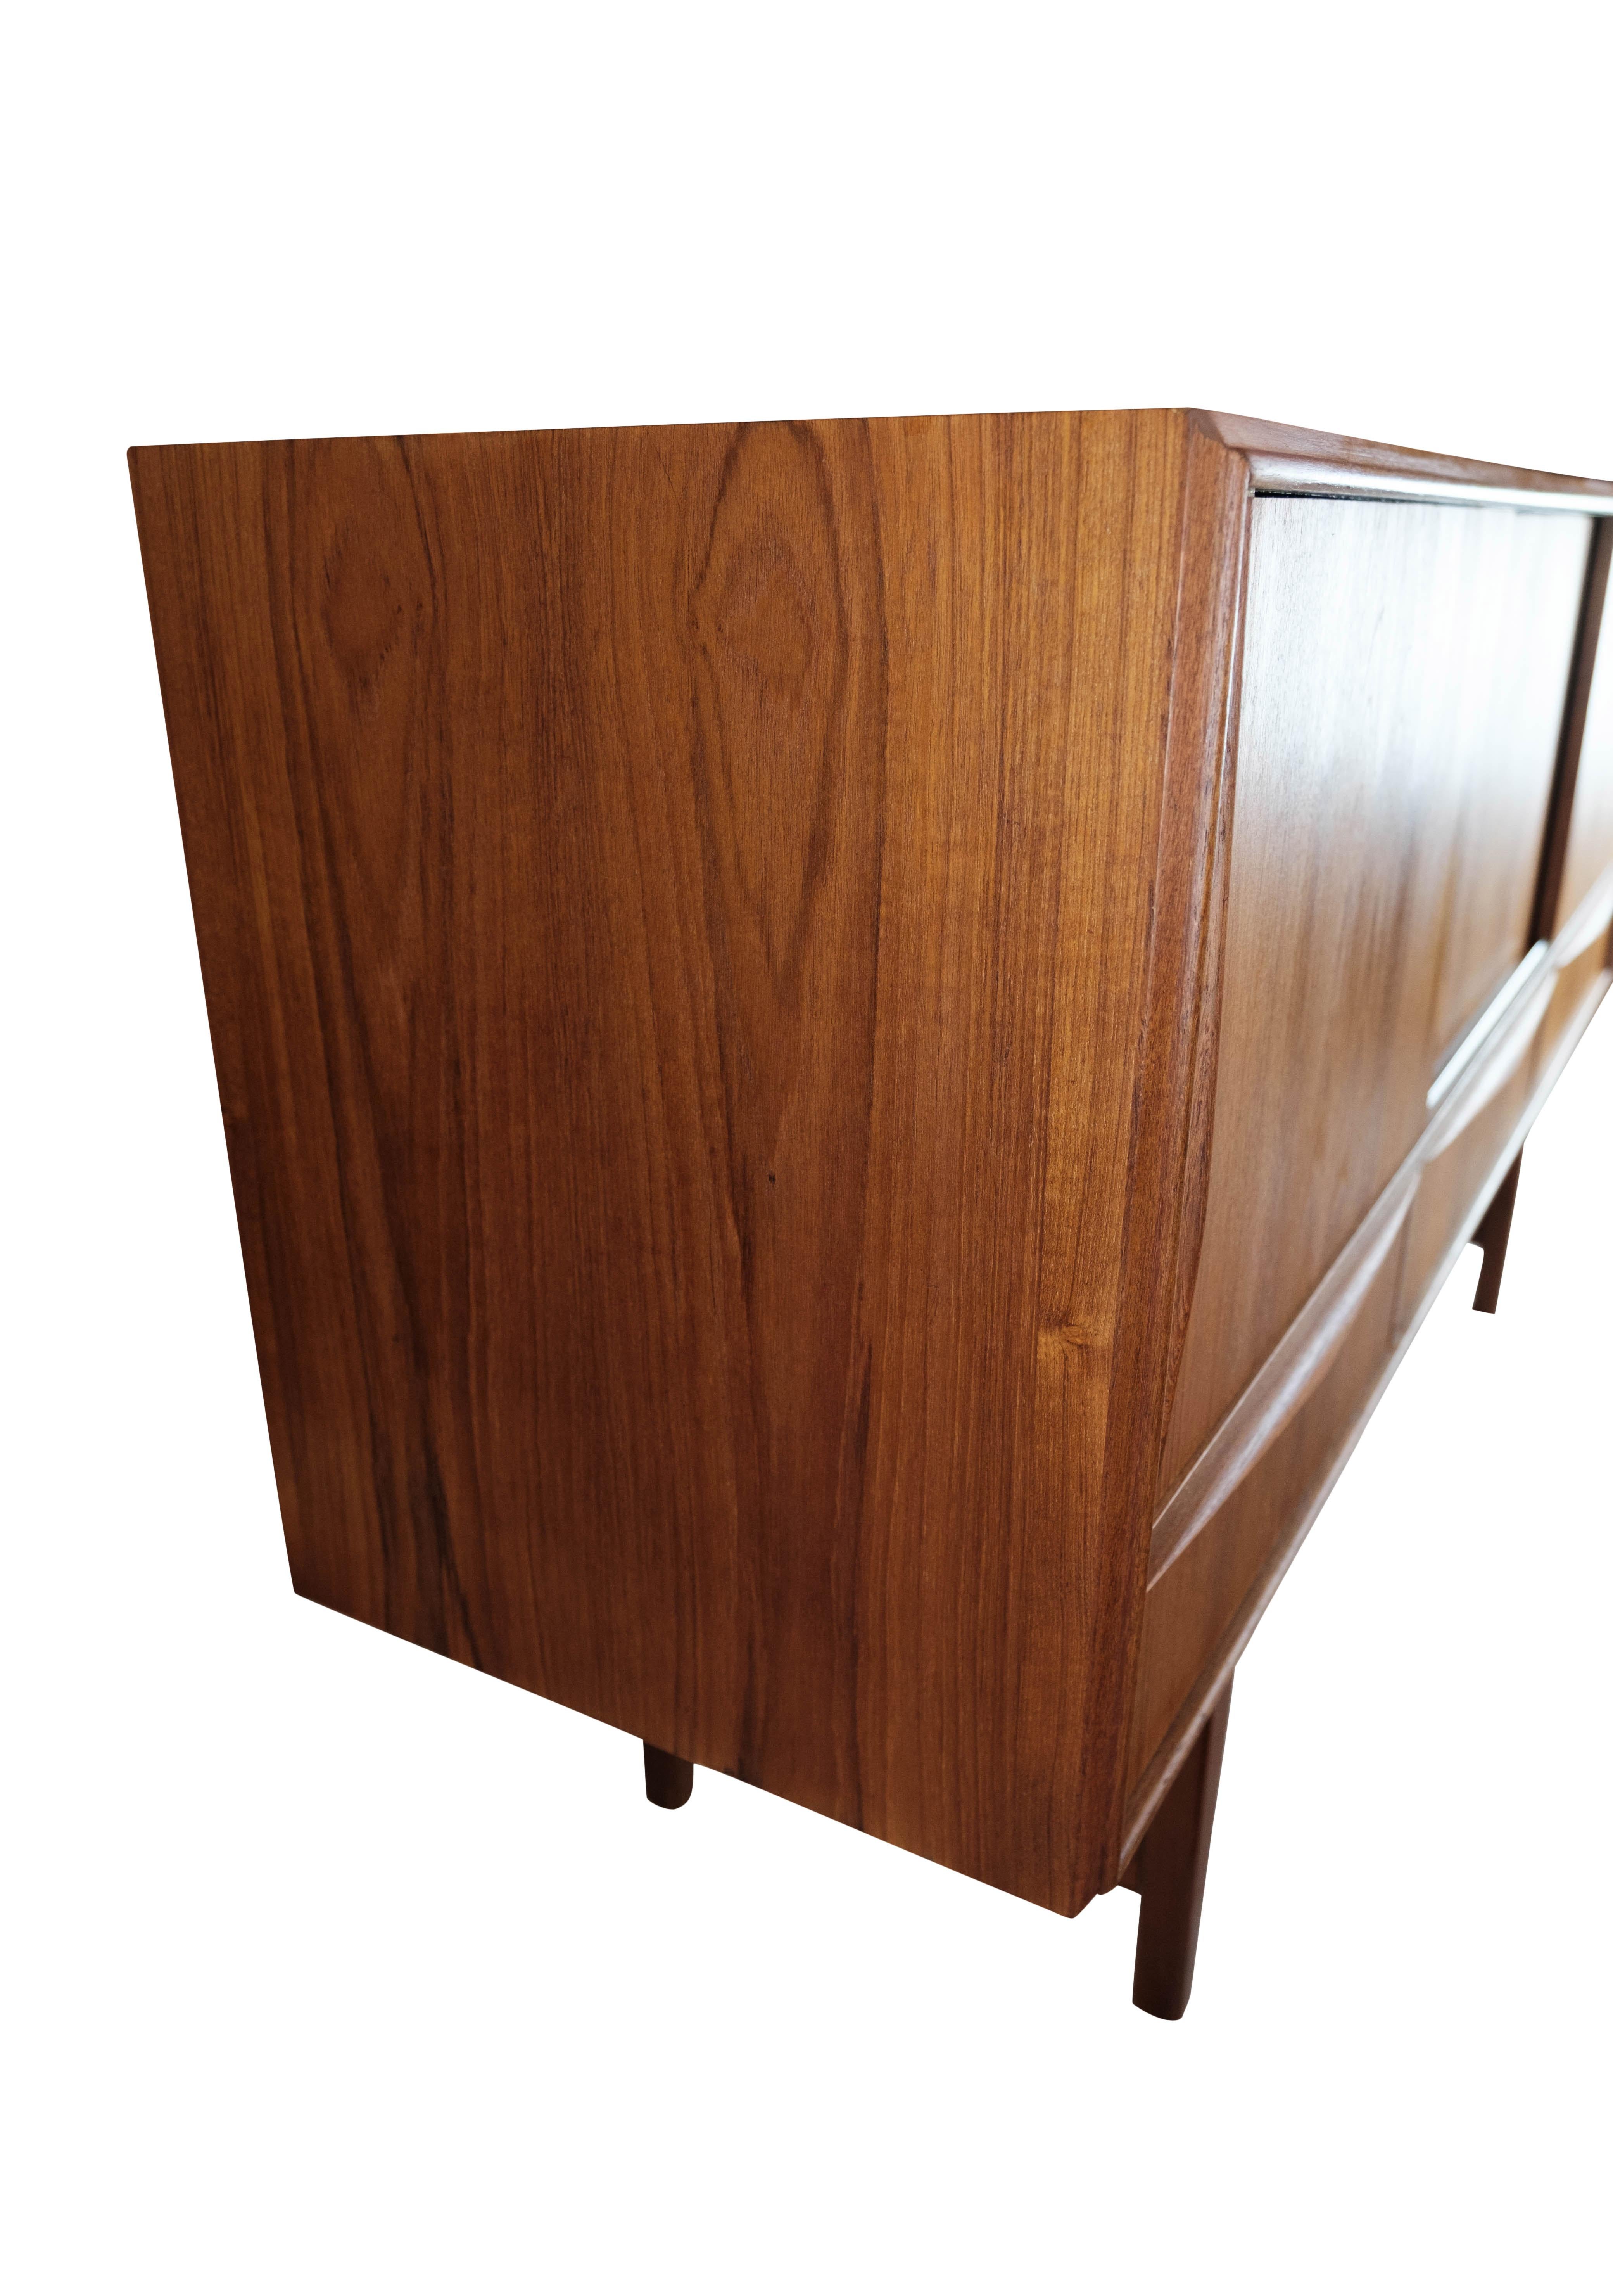 Sideboard in teak of Danish design from the 1960s. The item is in great vintage condition.